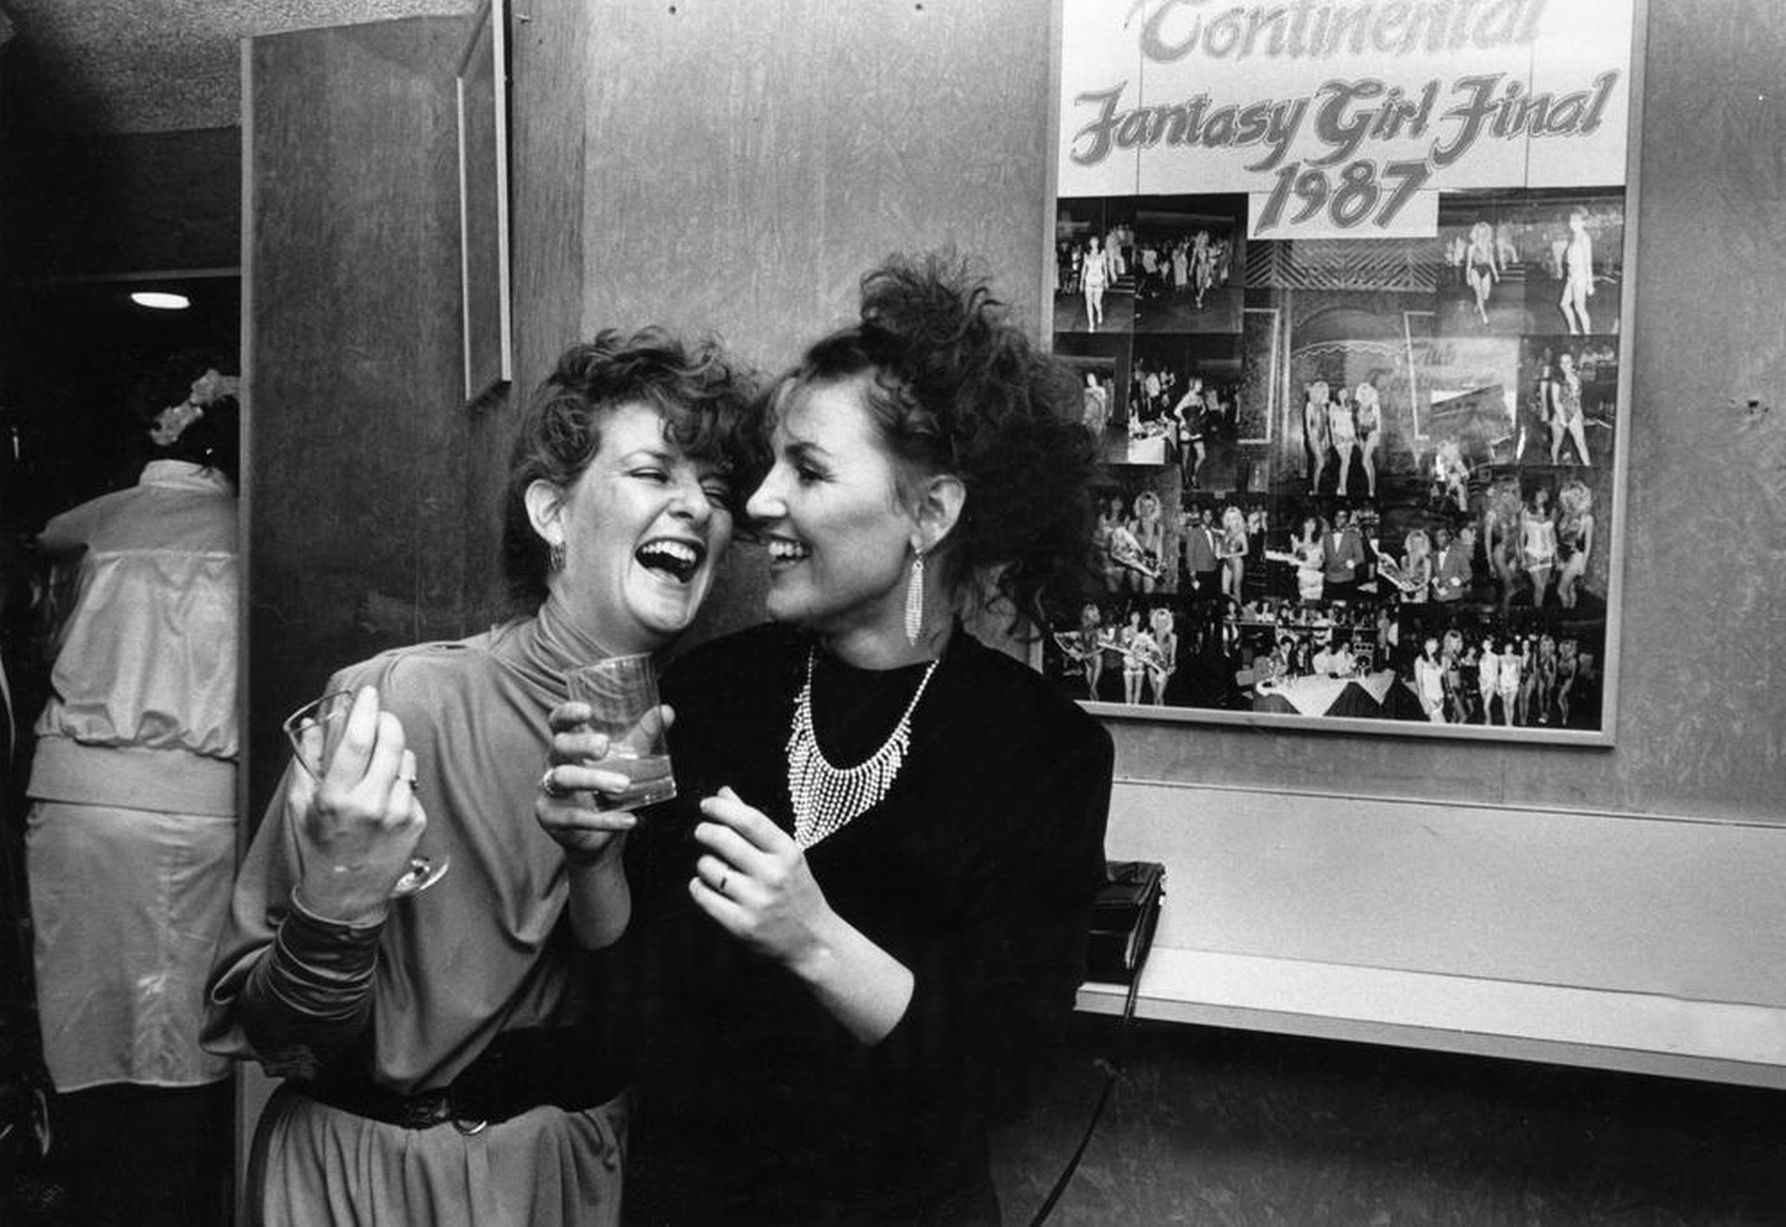 Giggles and a good time at Liverpool's Club Continental, 25th February 1988